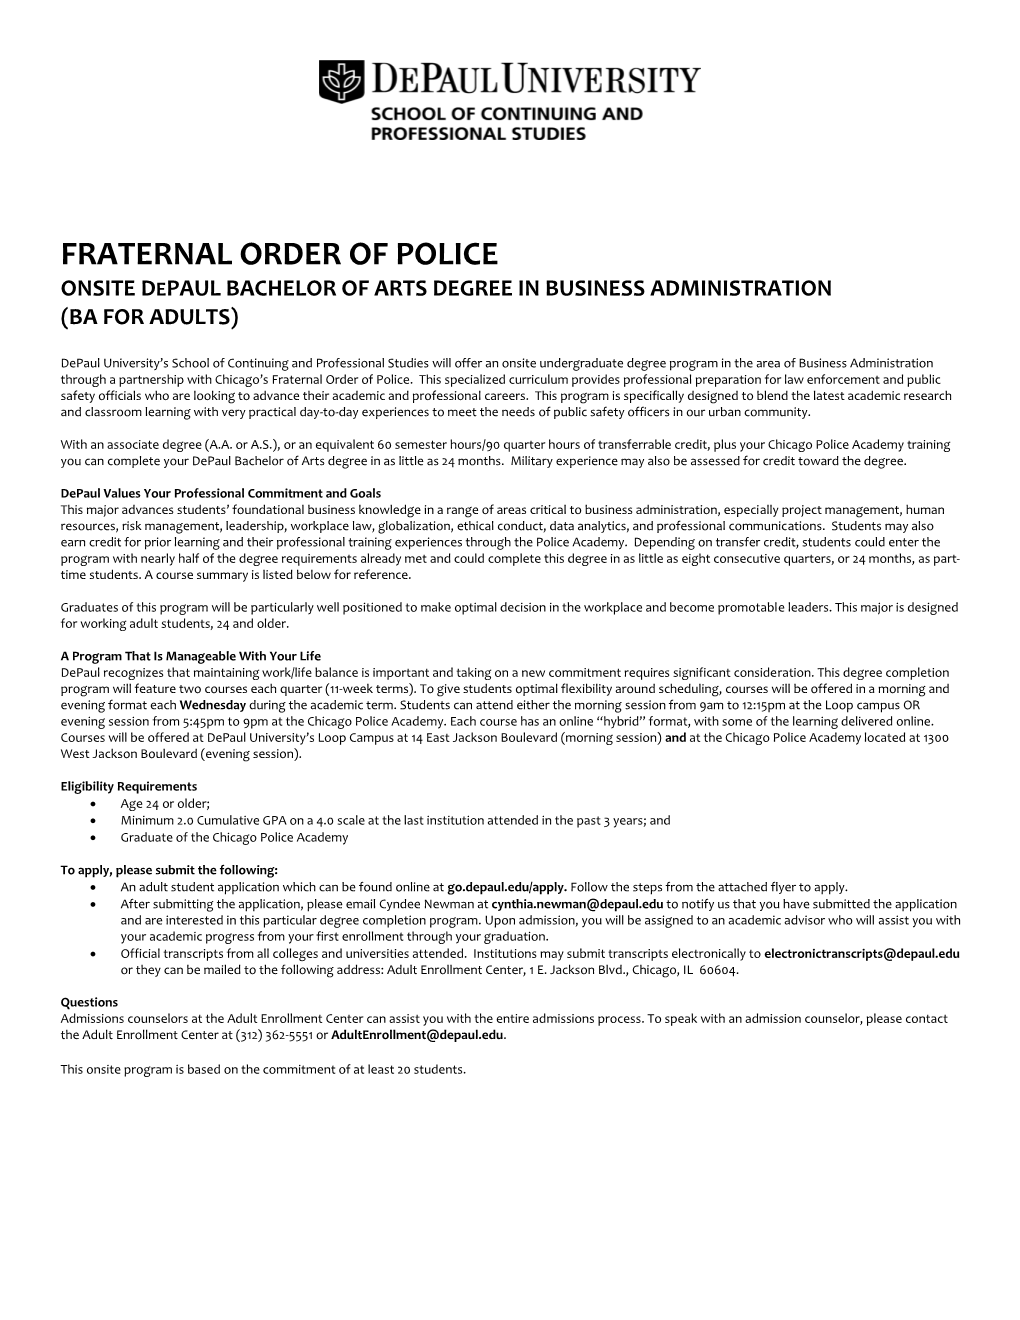 Fraternal Order of Police Onsite Depaul Bachelor of Arts Degree in Business Administration (Ba for Adults)